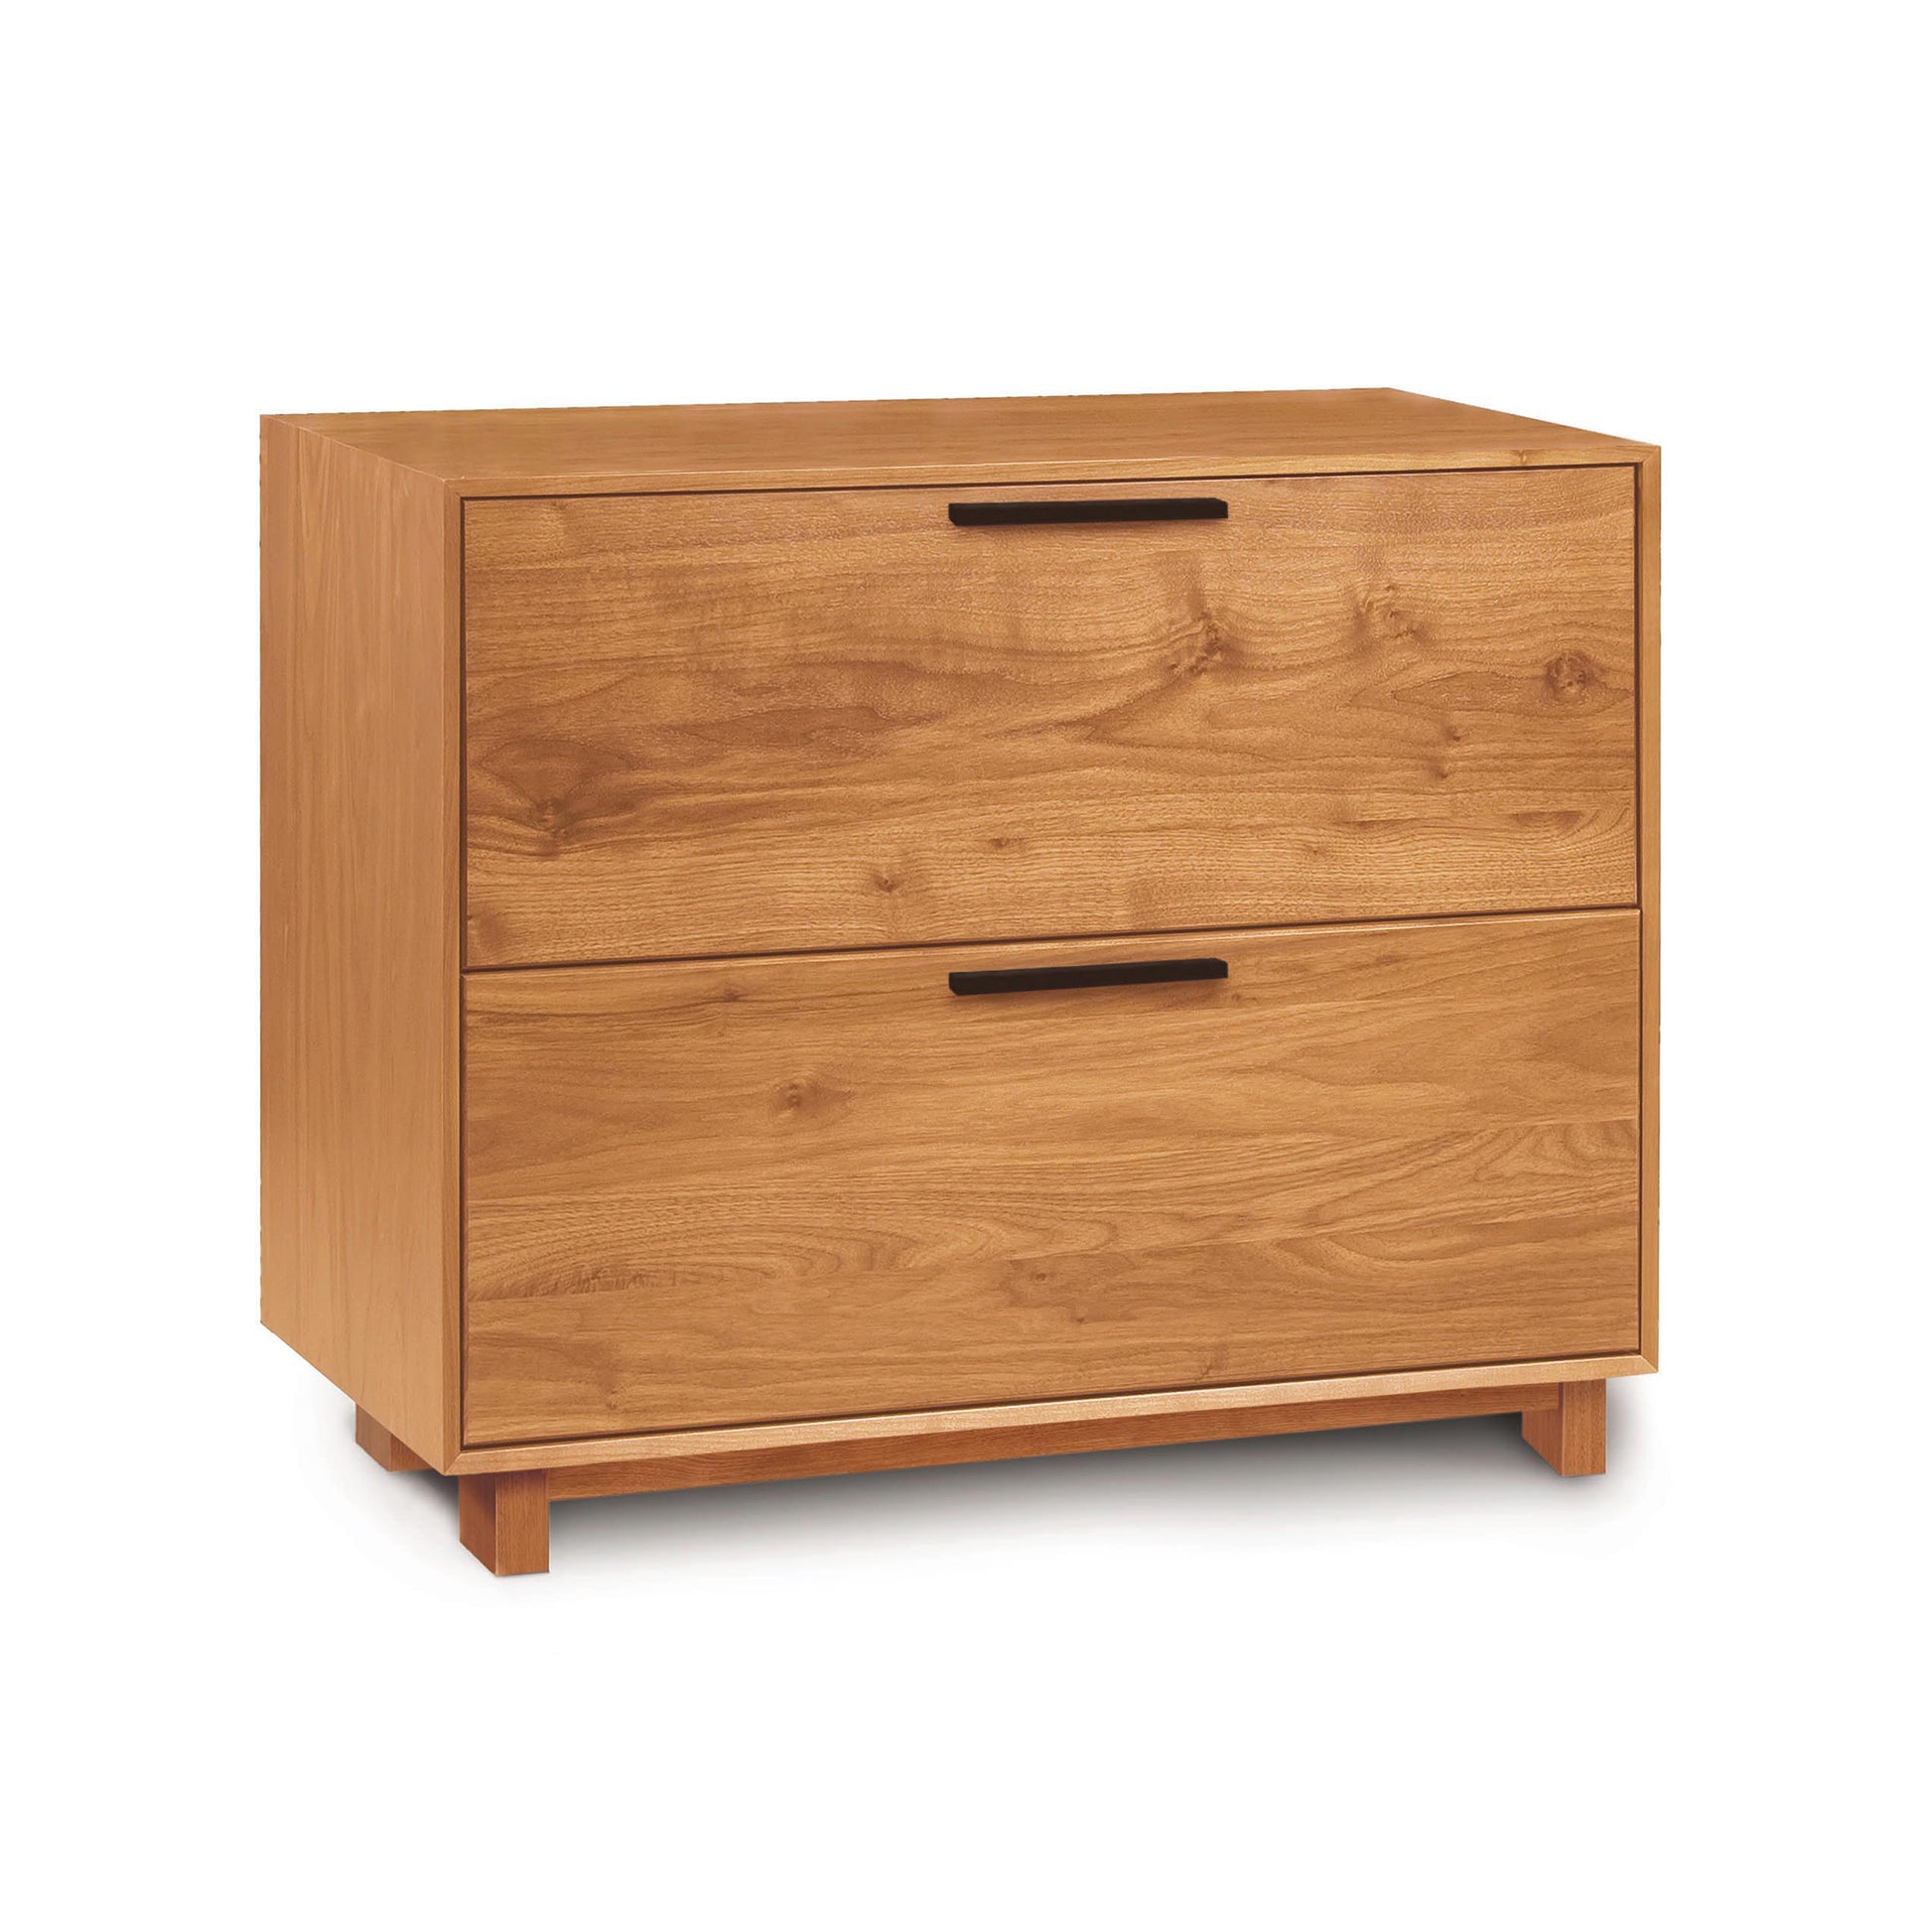 A Linear Lateral File Cabinet from Copeland Furniture, made from sustainable hardwood, displayed on a white background.